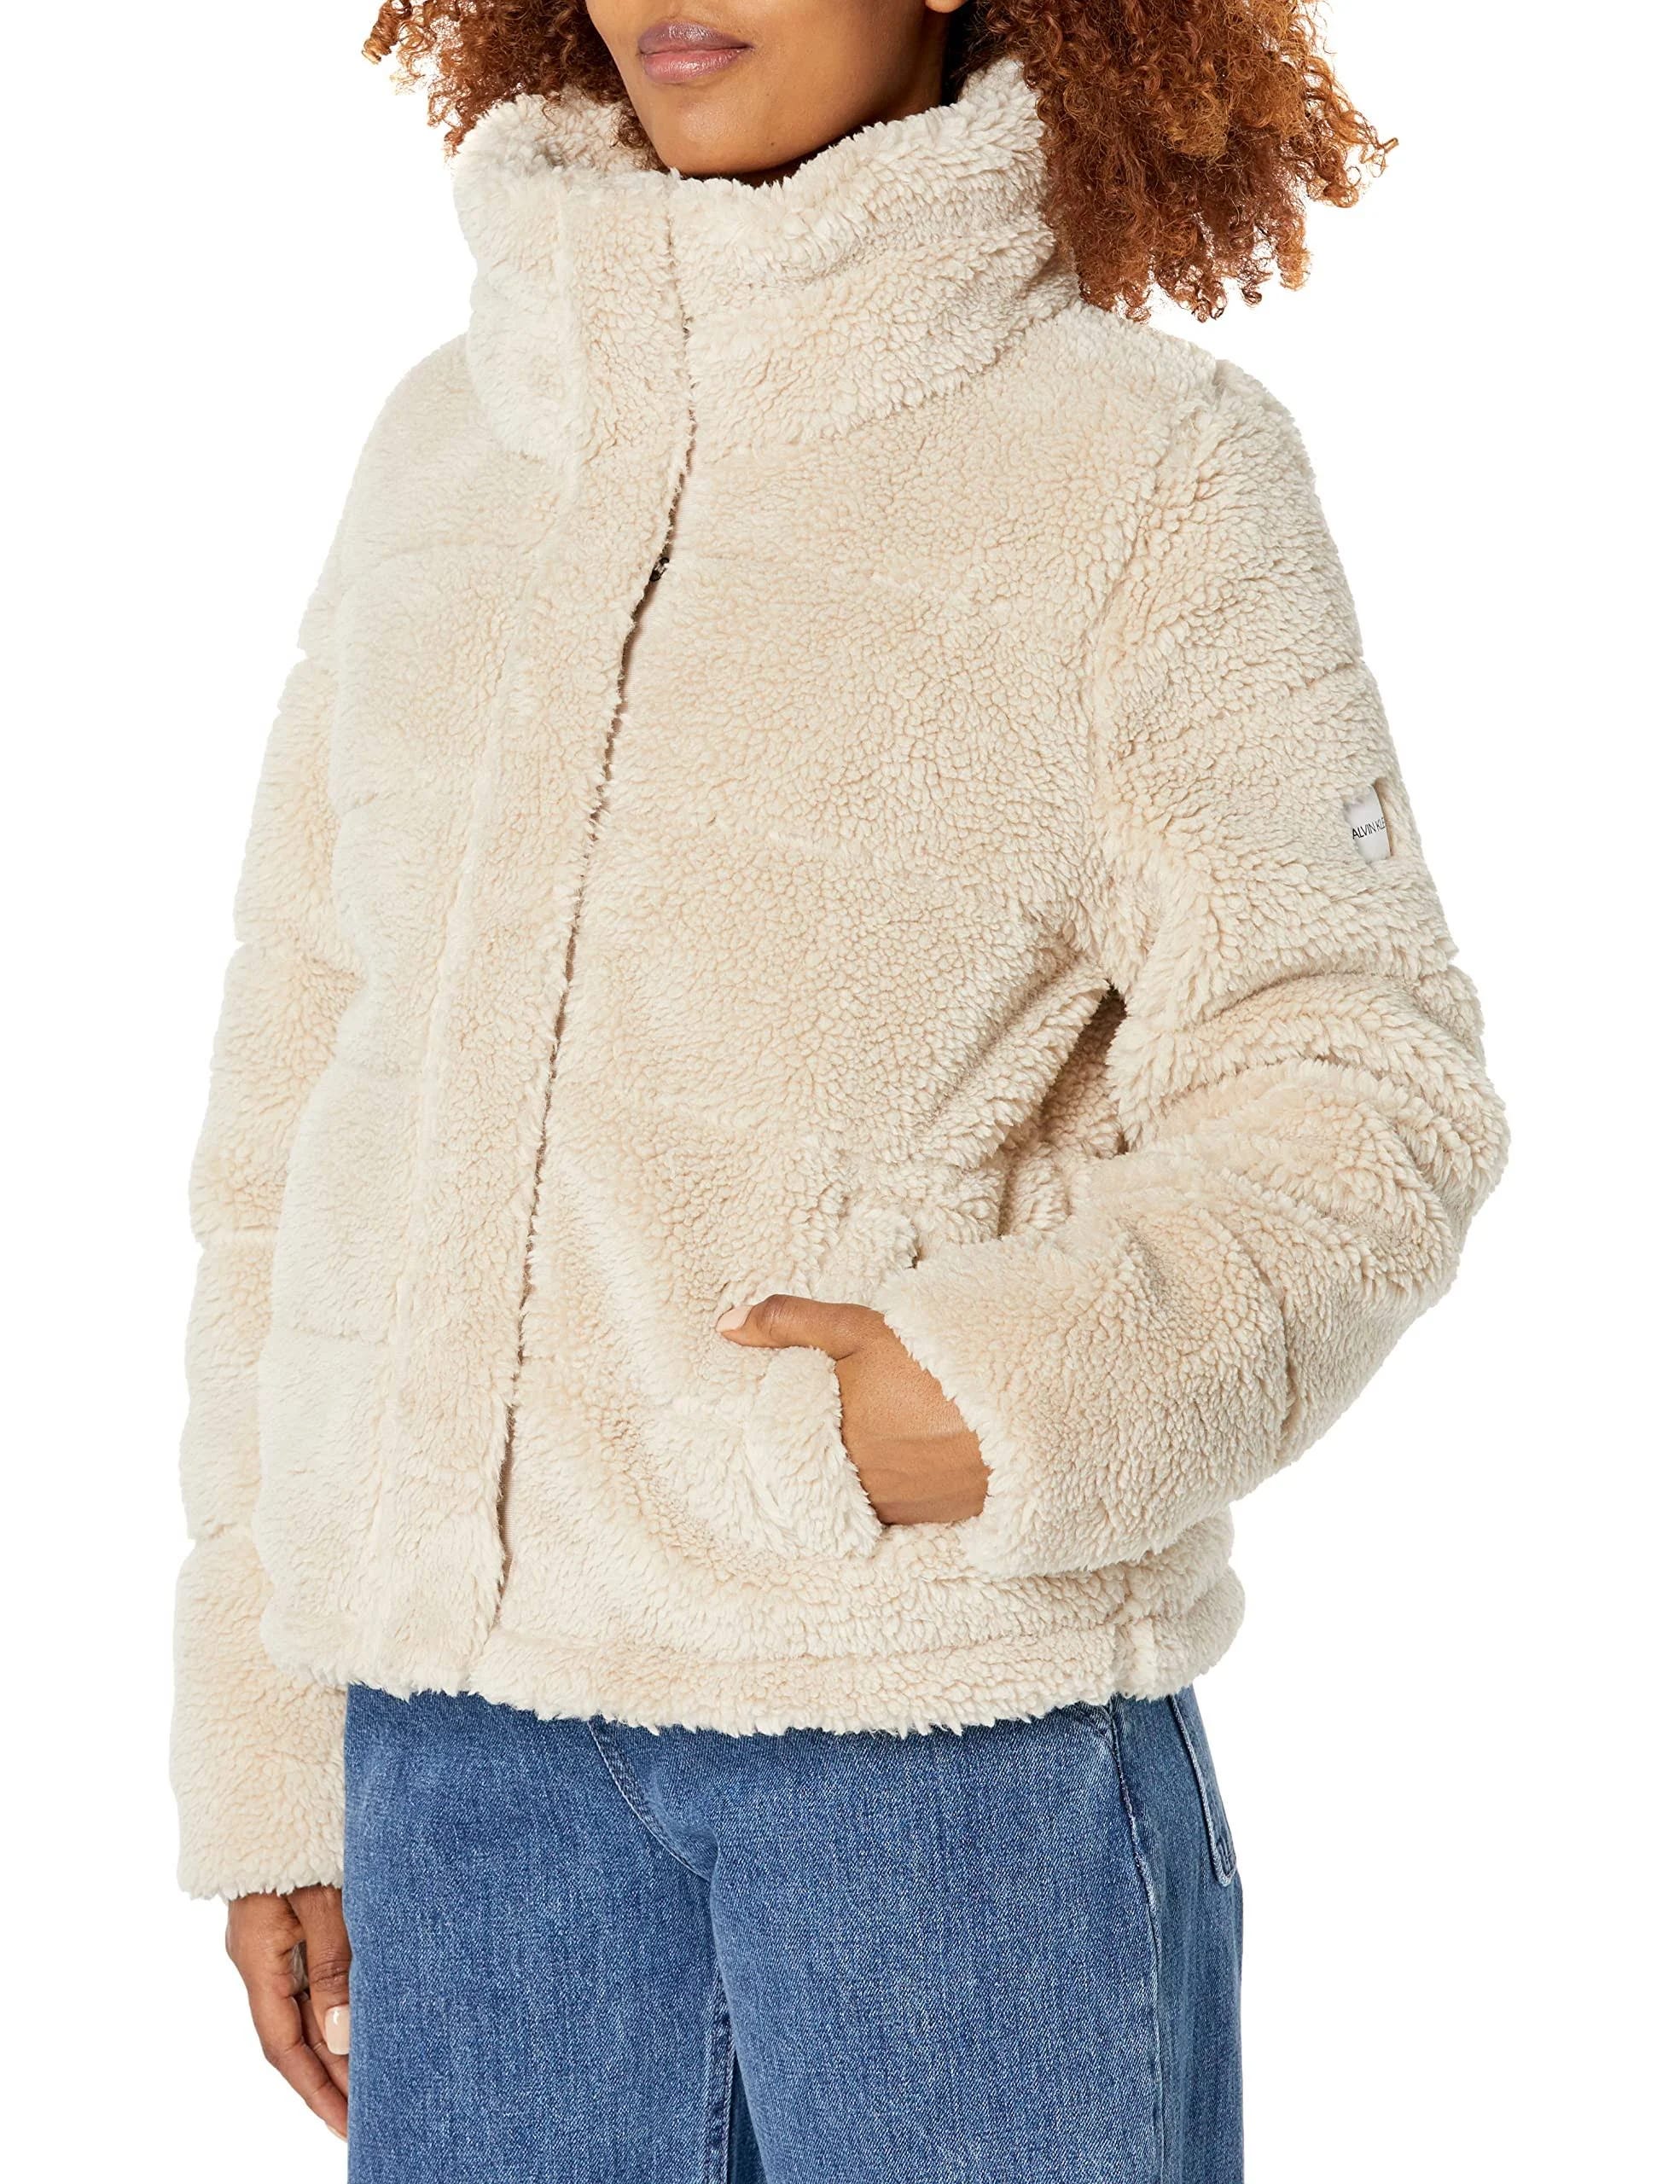 Calvin Klein Women's Cropped Faux-Fur Teddy Coat - Cozy & Warm, Perfect for Winter | Image